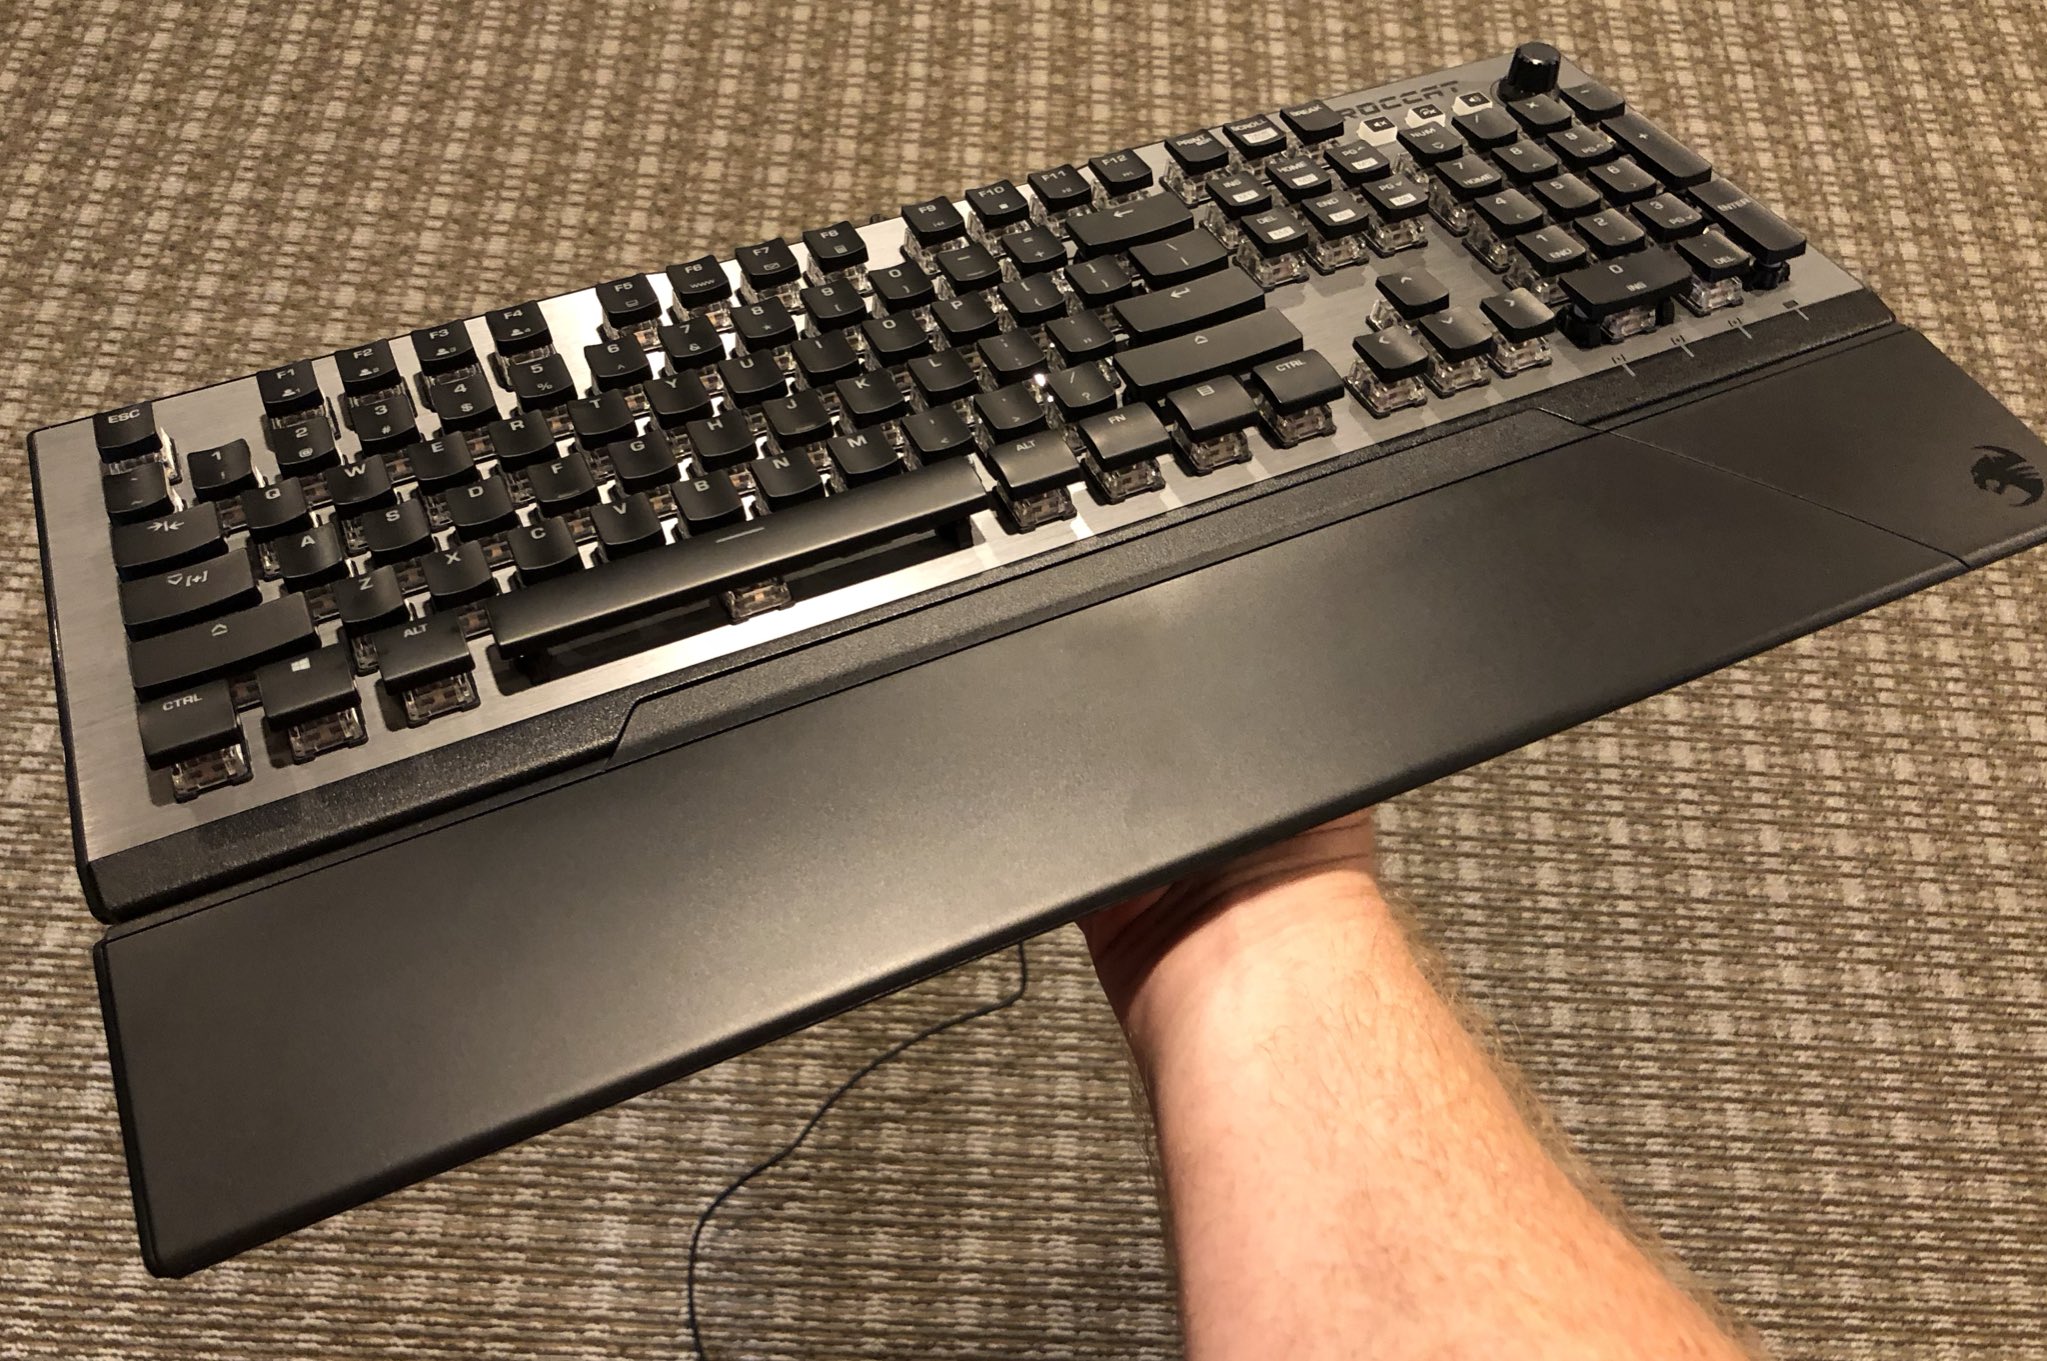 Scott Wasson Behold The Roccat Vulcan 1 Aimo Keyboard A New Gaming Keyboard With Some Interesting Ideas Including Custom Titan Switches And Minimalist Floating Keycaps T Co Yy0itniuo4